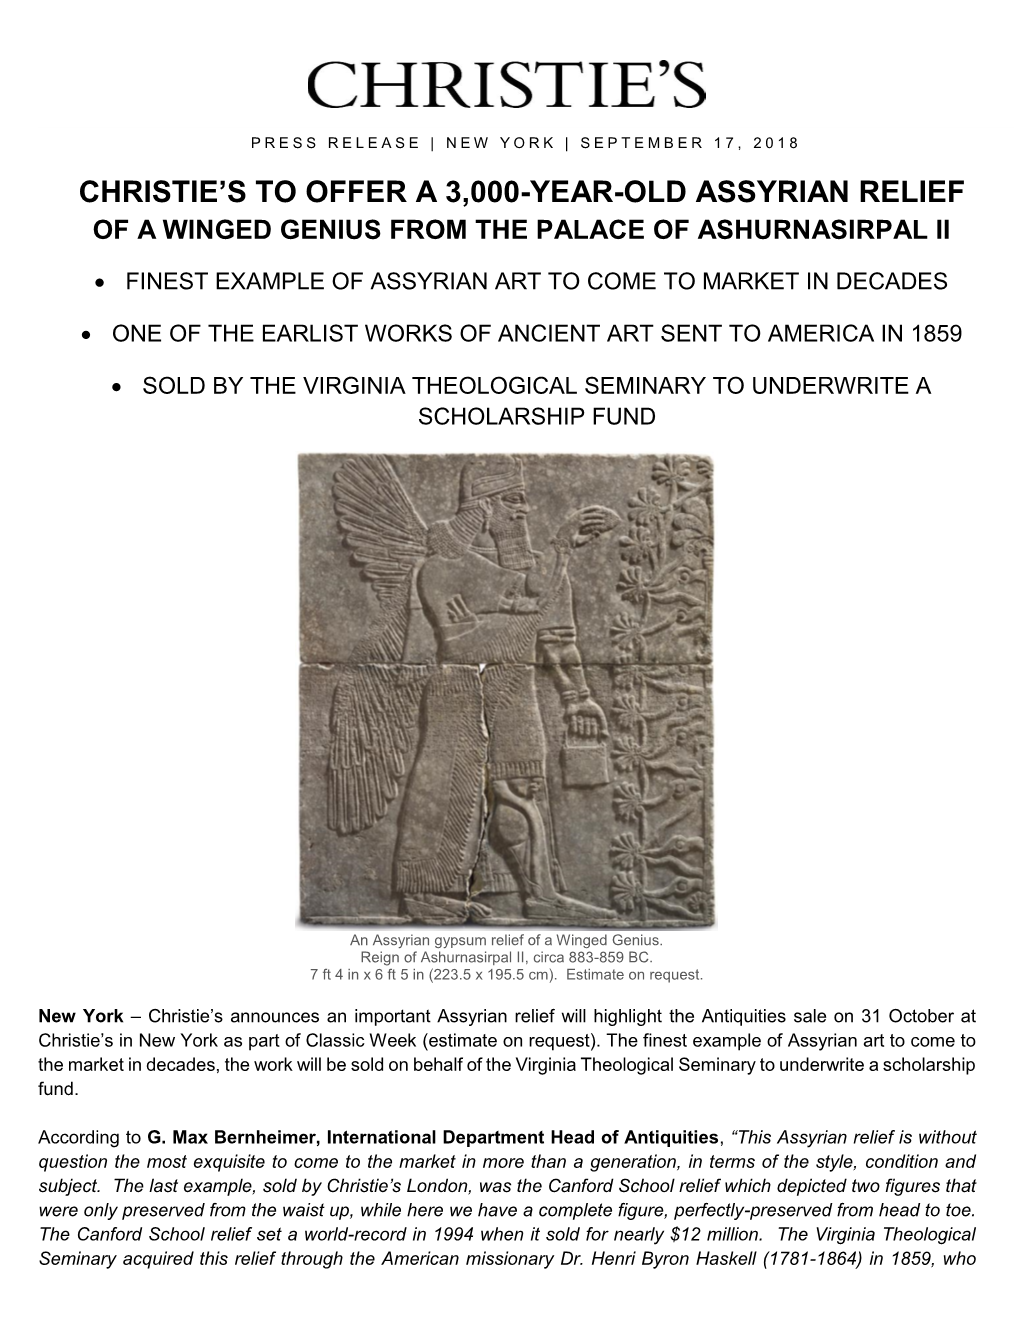 Christie's to Offer a 3000-Year-Old Assyrian Relief of a Winged Genius